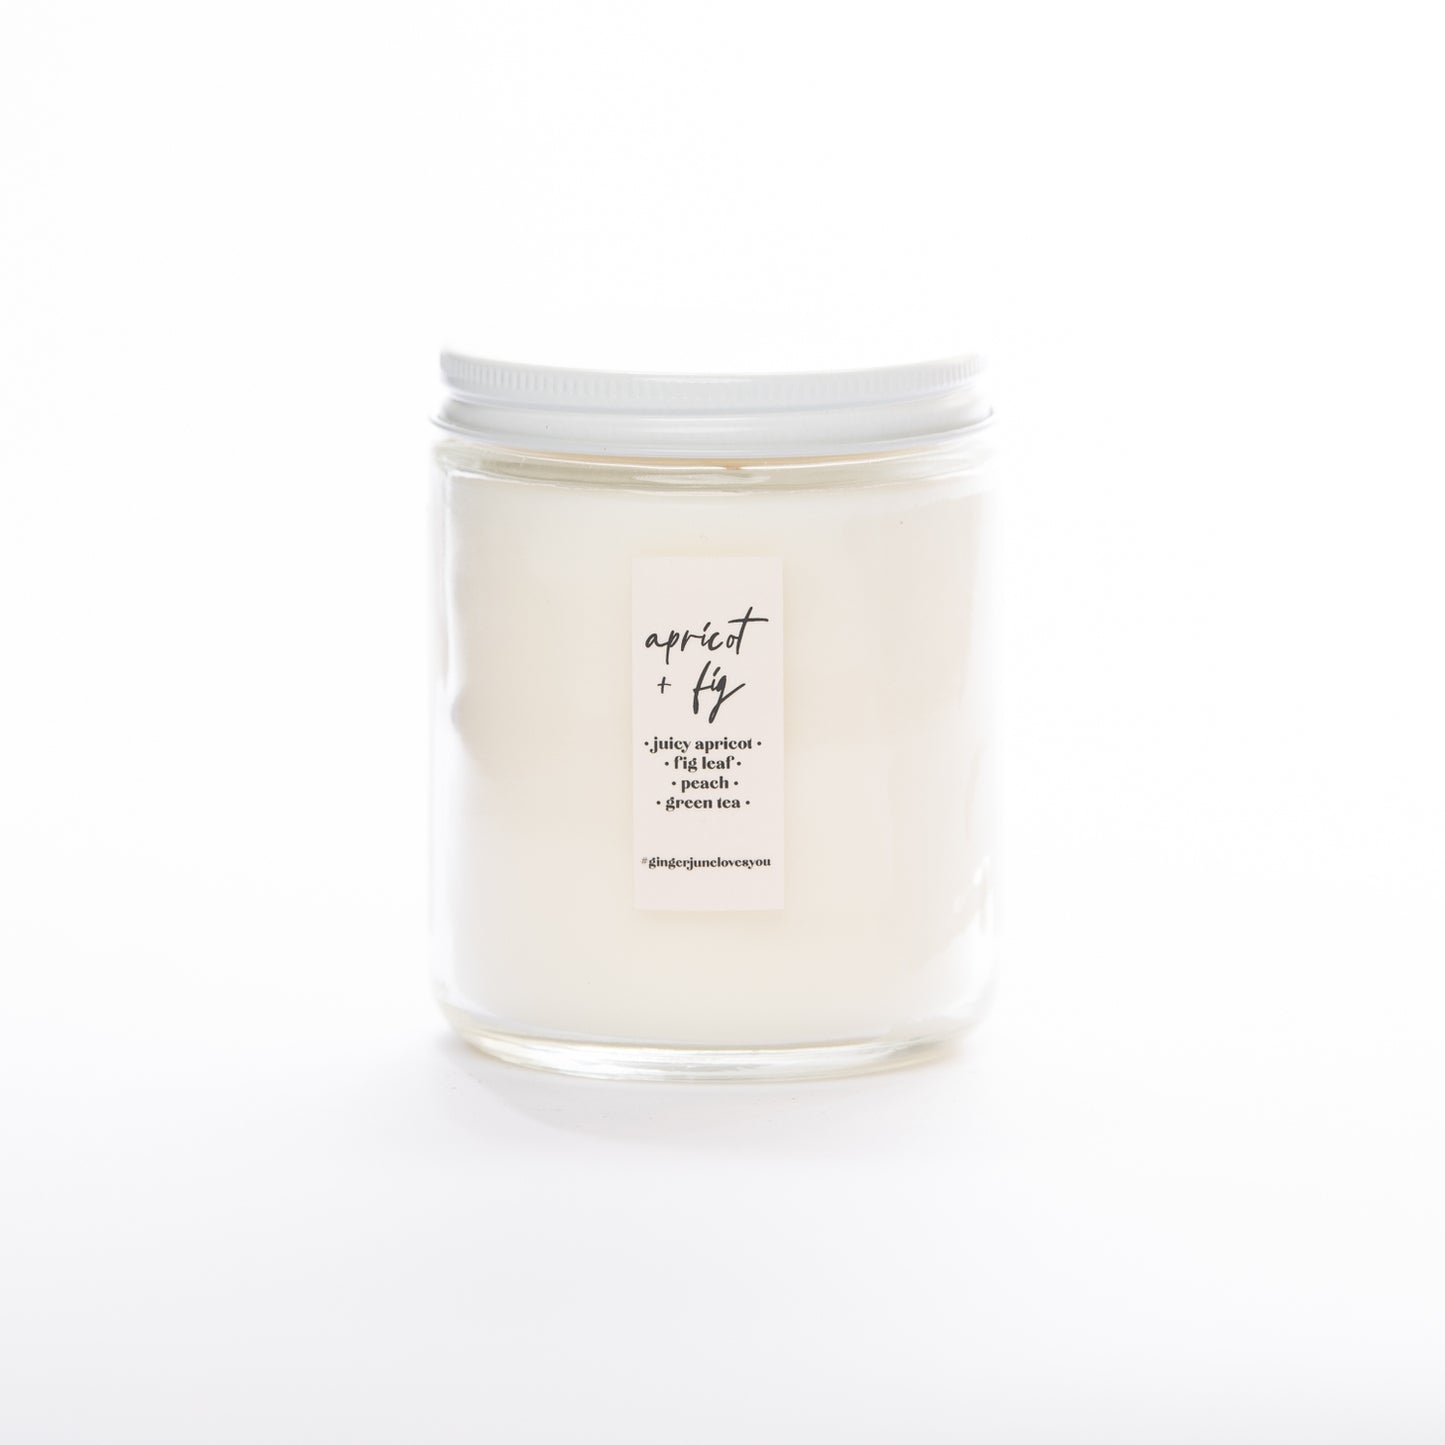 'You got this' 9oz Apricot fig candle